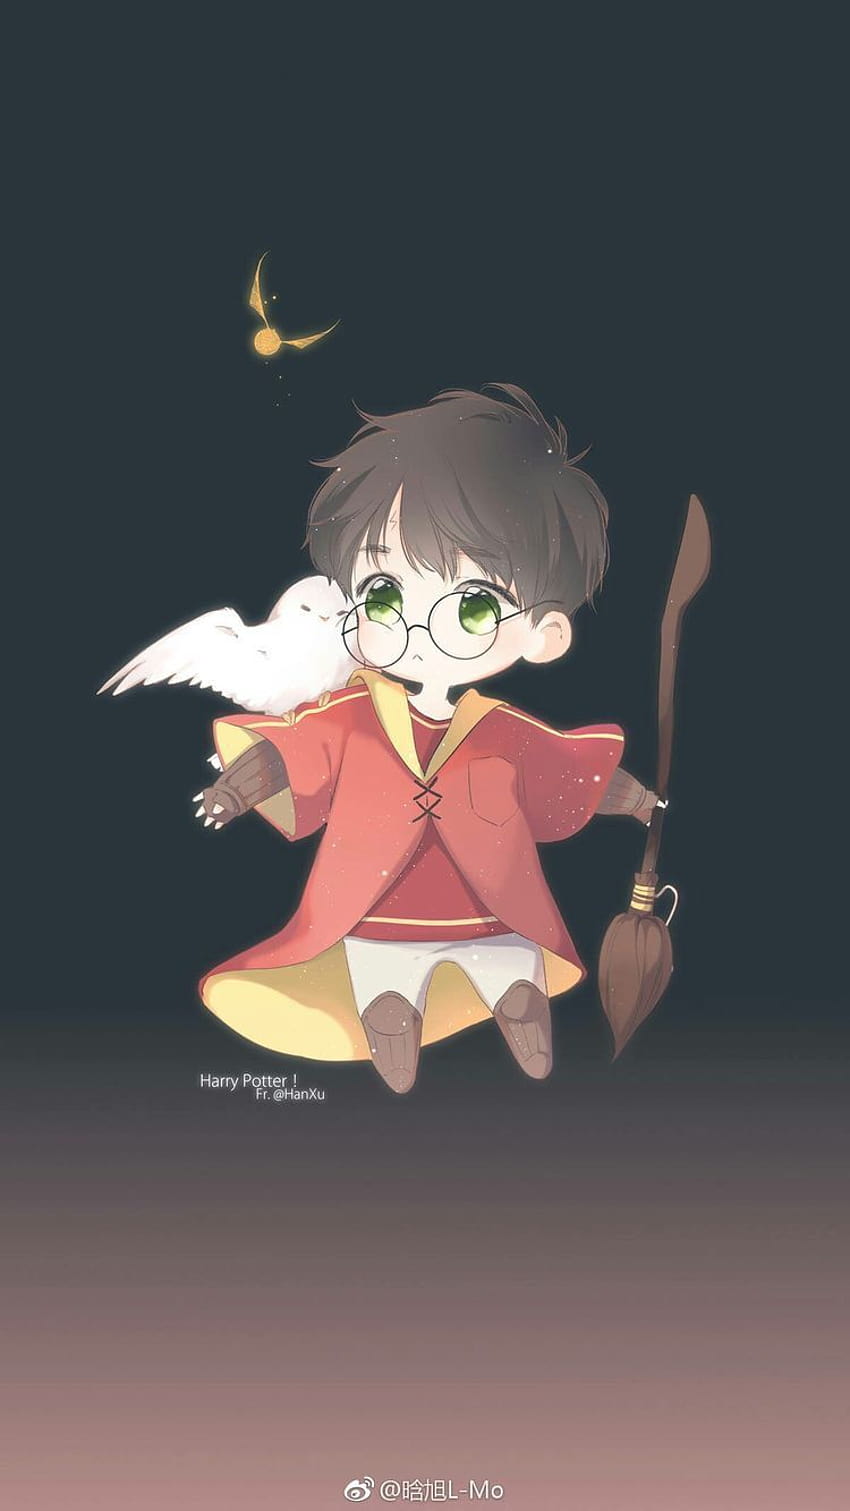 Harry Potter Anime by kaileyrox on DeviantArt